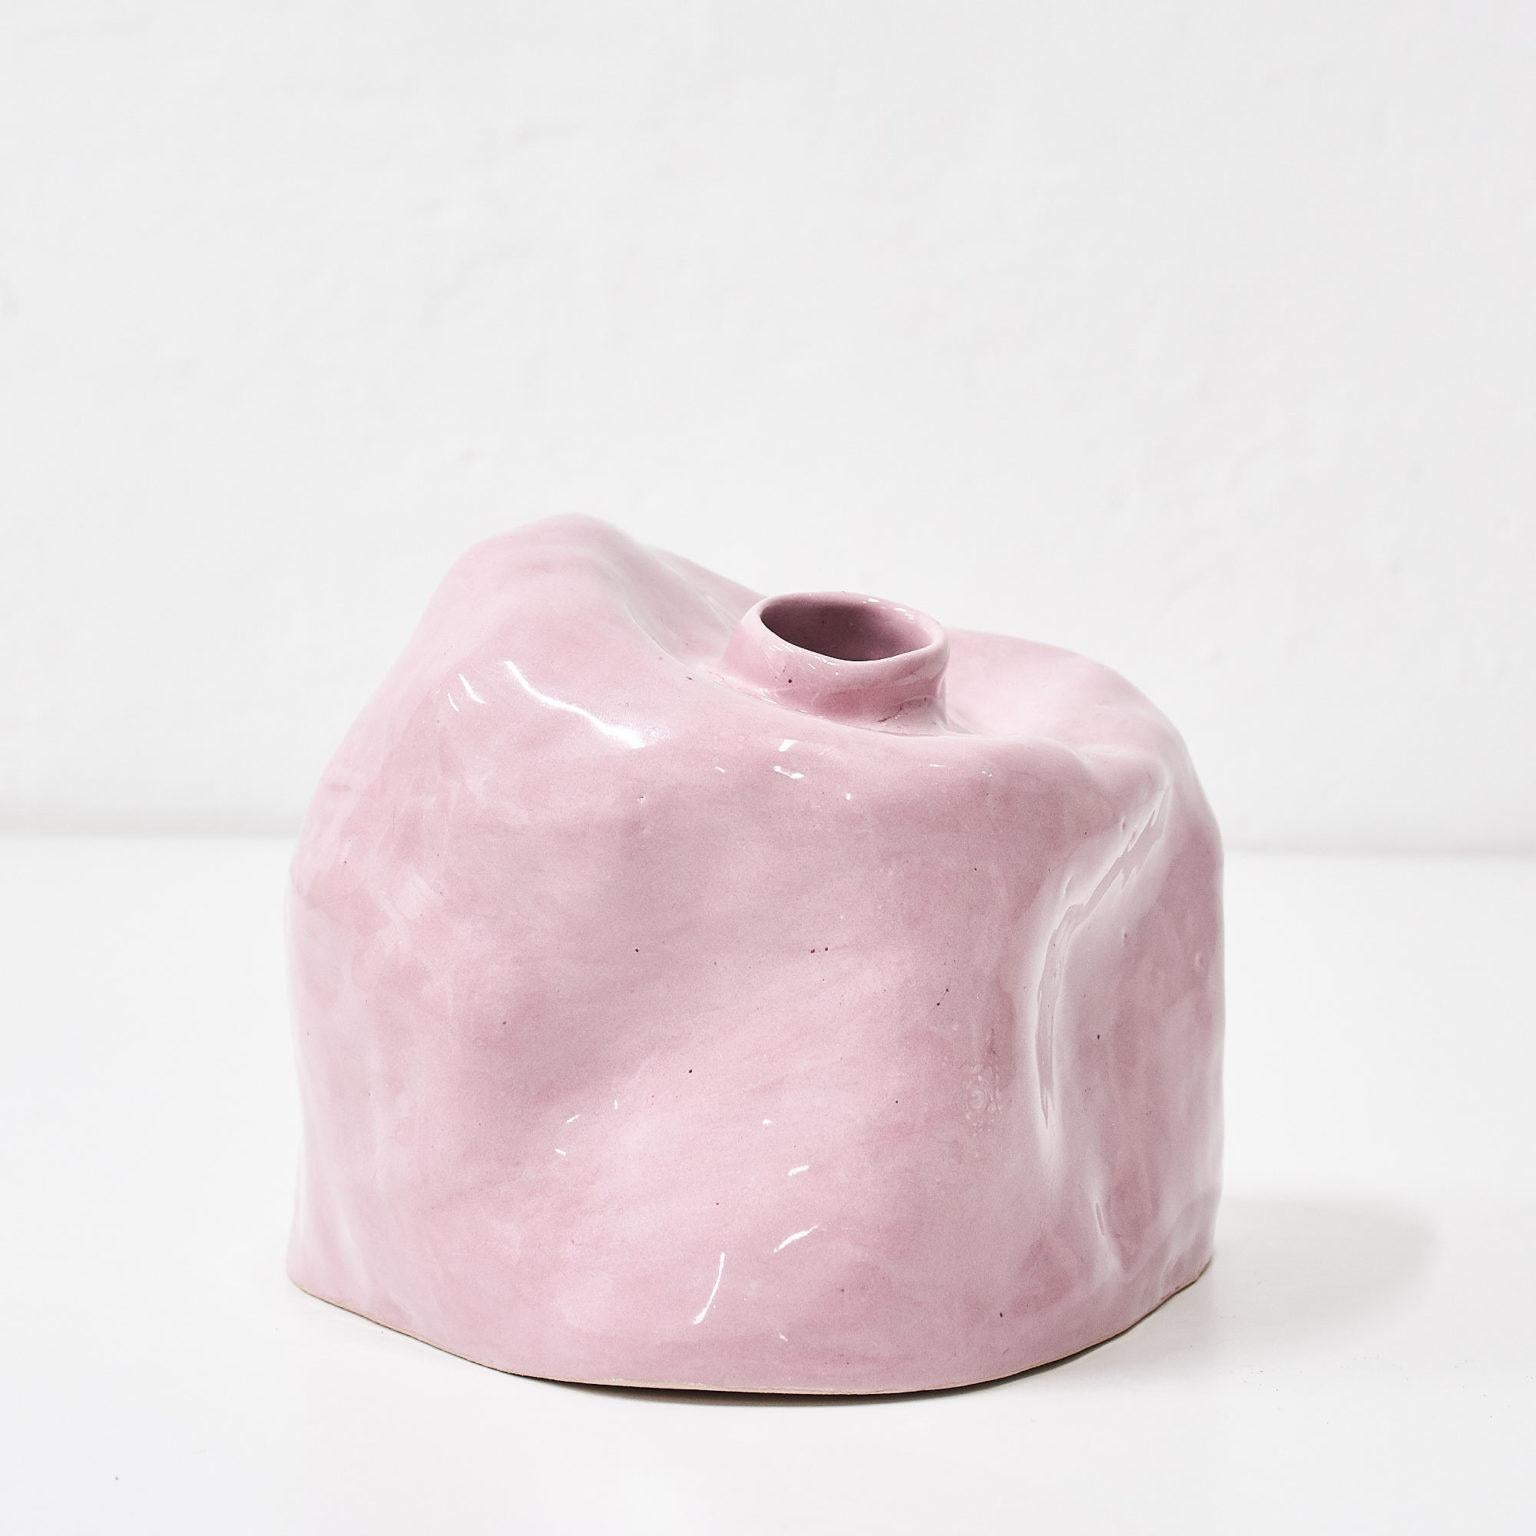 Blob Vase by Siup Studio
Dimensions: D12 x W17 x H15cm
Materials: Ceramics

Siup is a small design studio based in Warsaw. The concept is created by three friends – Martyna Dymek, Marcin Sieczka and Kasia Skoczylas – who have met in University